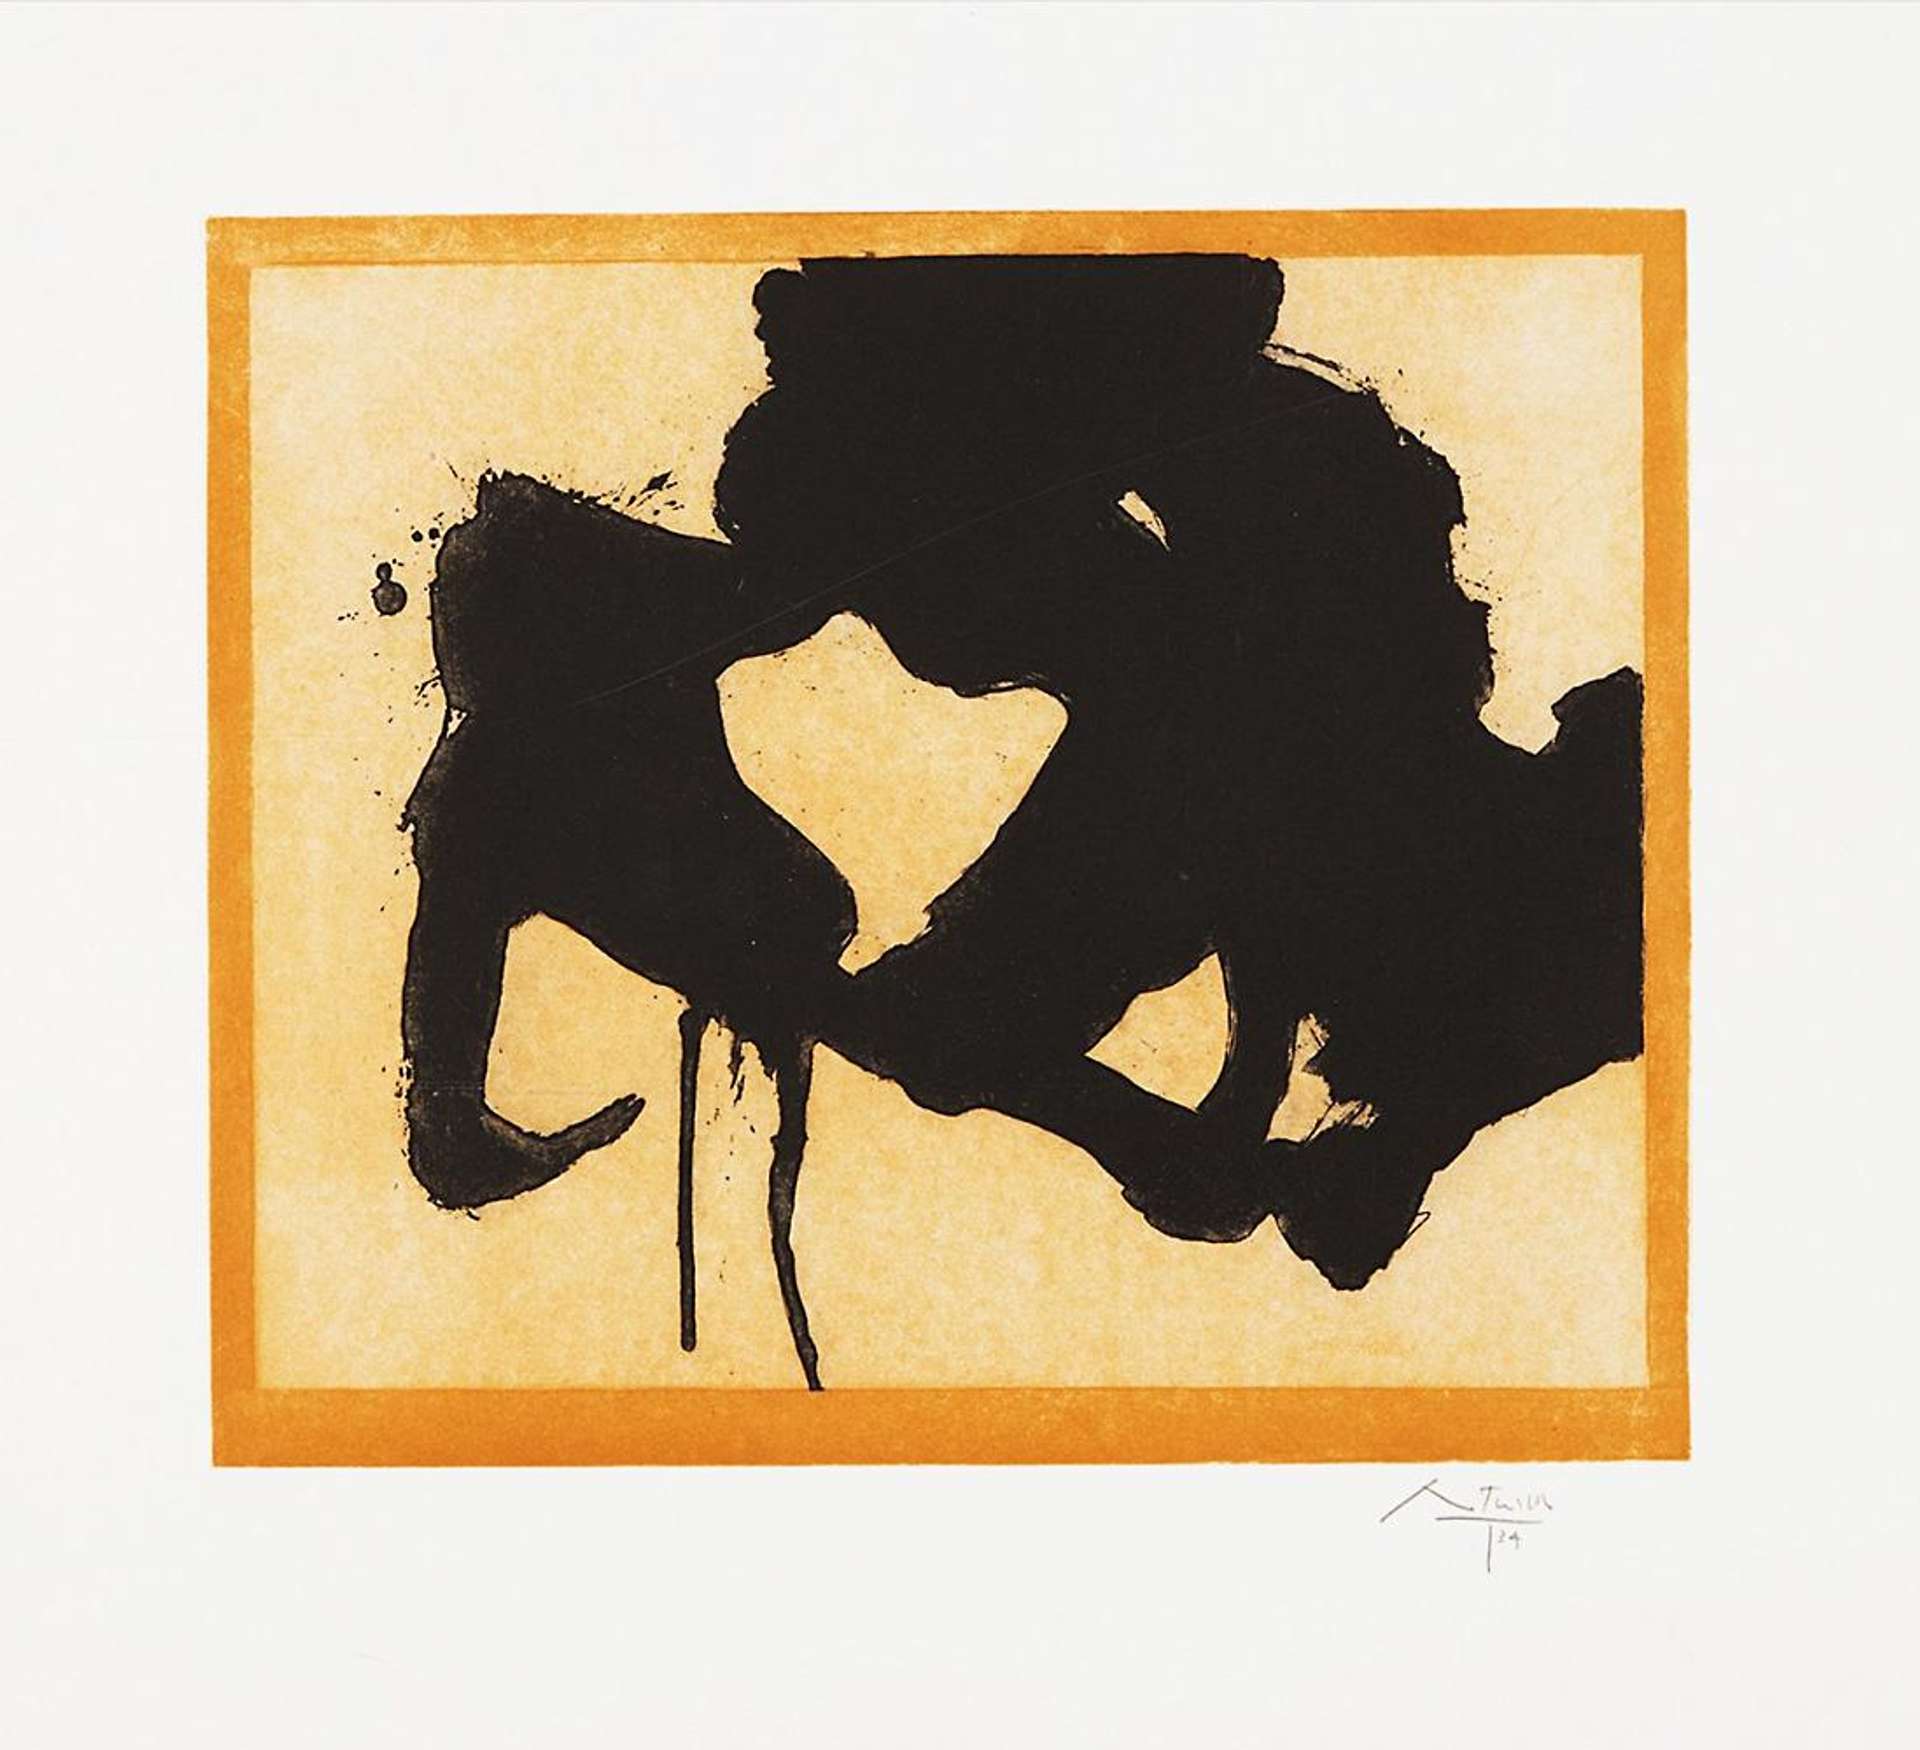 At The Edge - Signed Print by Robert Motherwell 1948 - MyArtBroker